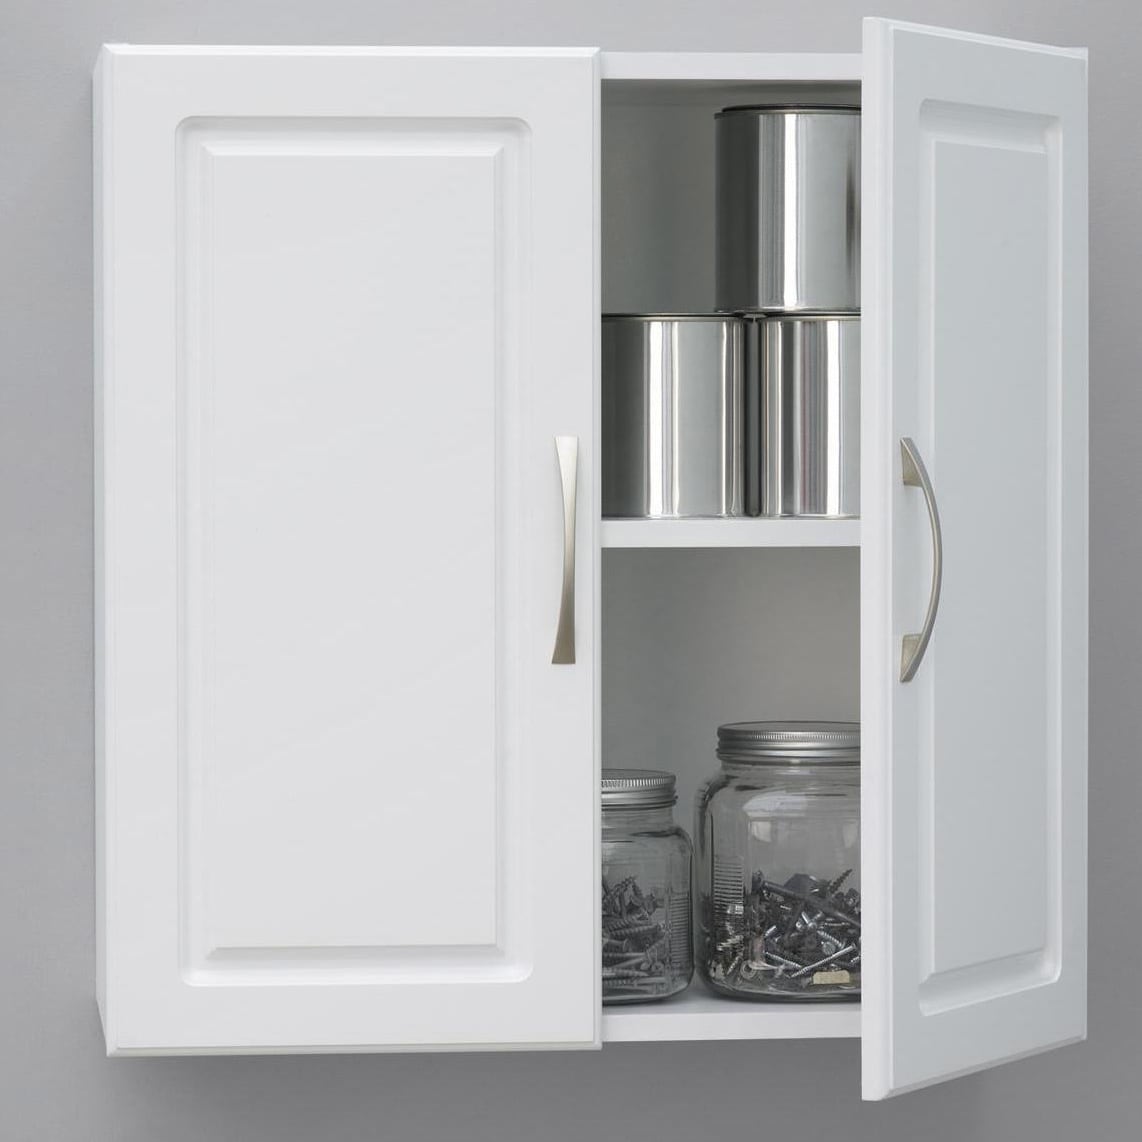 Shop Systembuild White Kendall 24 Inch Wall Storage Cabinet On Sale Overstock 10553731